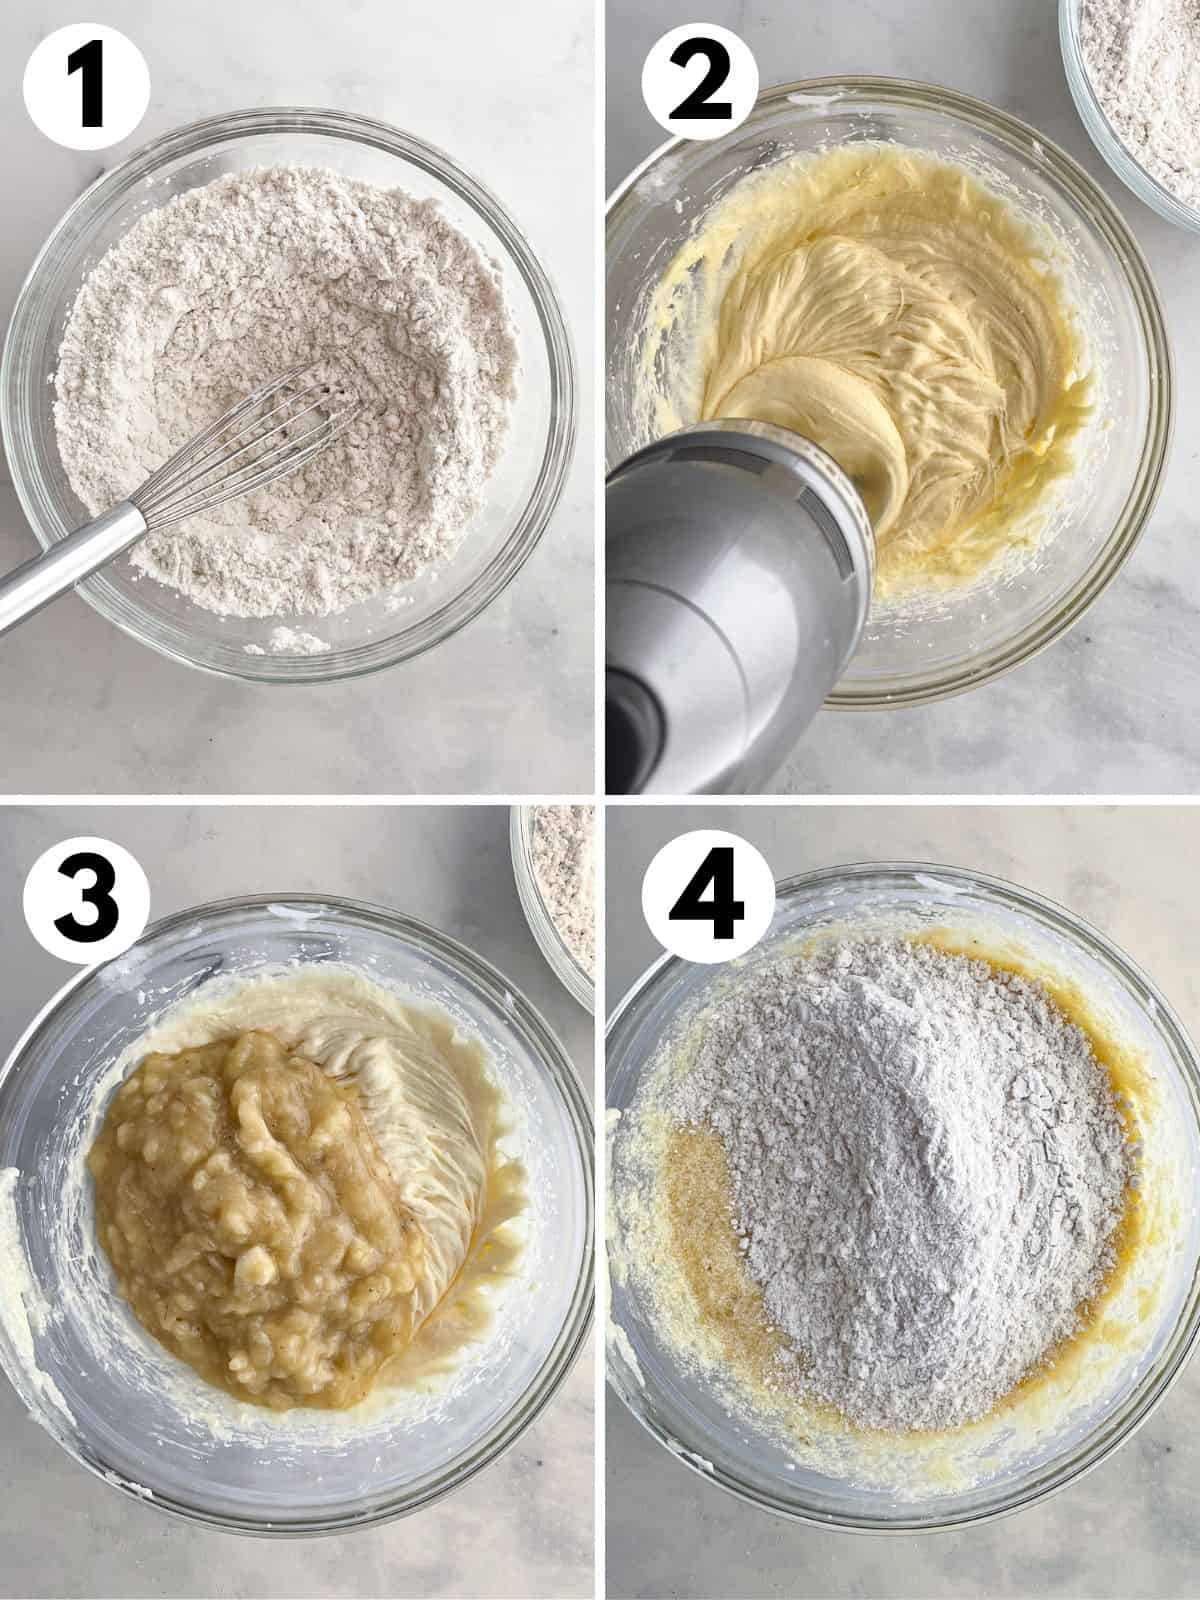 Steps for making gluten-free banana bread. 1. Whisking the dry ingredients. 2. Mixing the butter and sugar. 3. Adding the mashed bananas. 4. Adding the gluten-free flour.